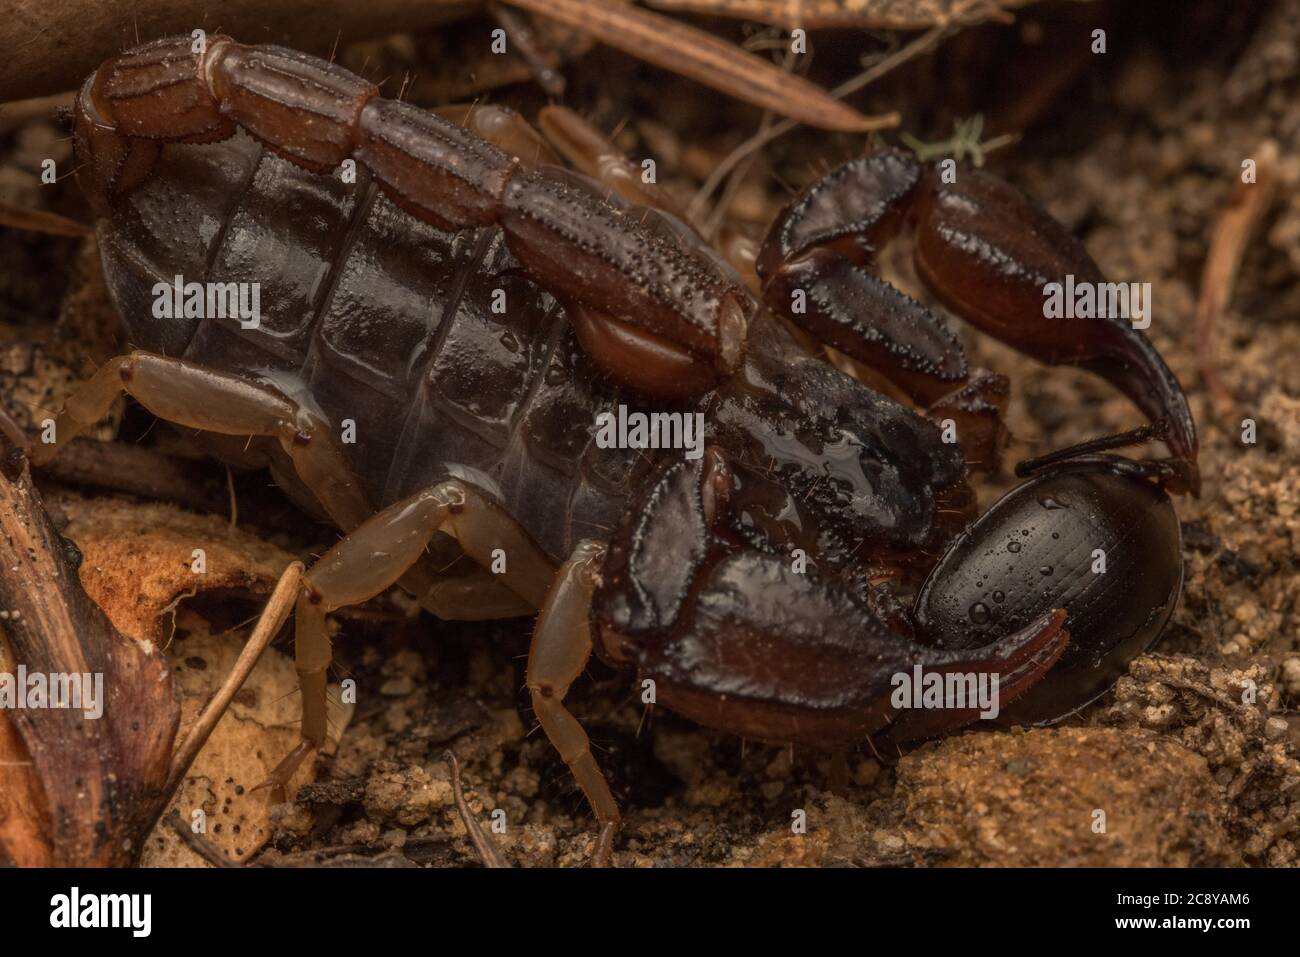 A western forest scorpion (Uroctonus mordax) from the Santa Cruz mountains of California, it is eating a beetle. Stock Photo